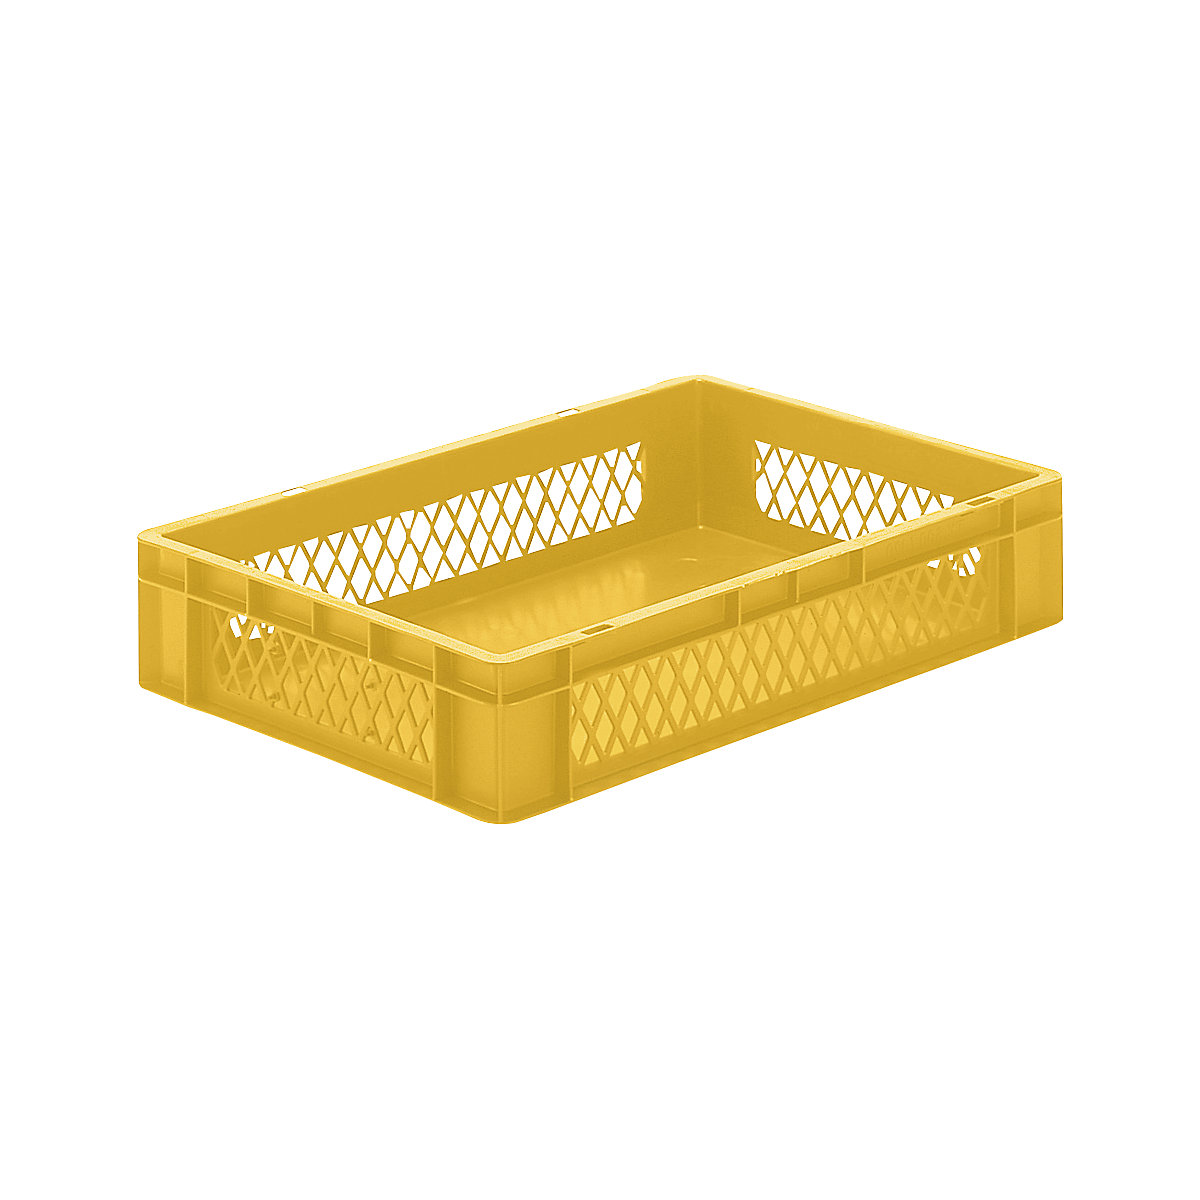 Euro stacking container, perforated walls, closed base, LxWxH 600 x 400 x 120 mm, yellow, pack of 5-7